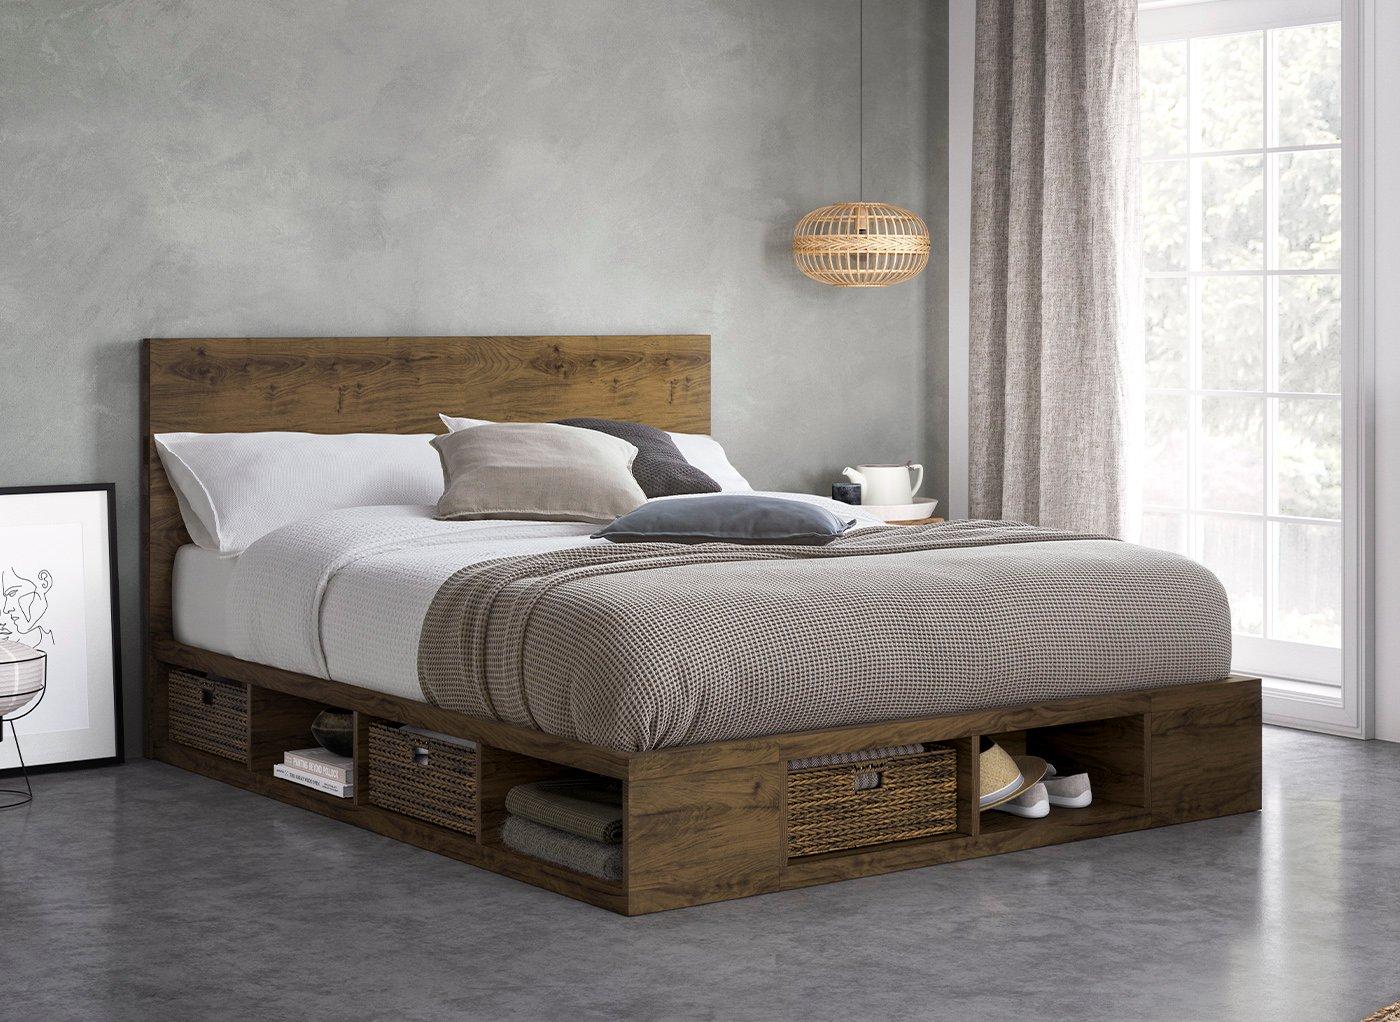 Wilkes Wooden Storage Bed Frame 4’6 Double OAK | Bed Sava